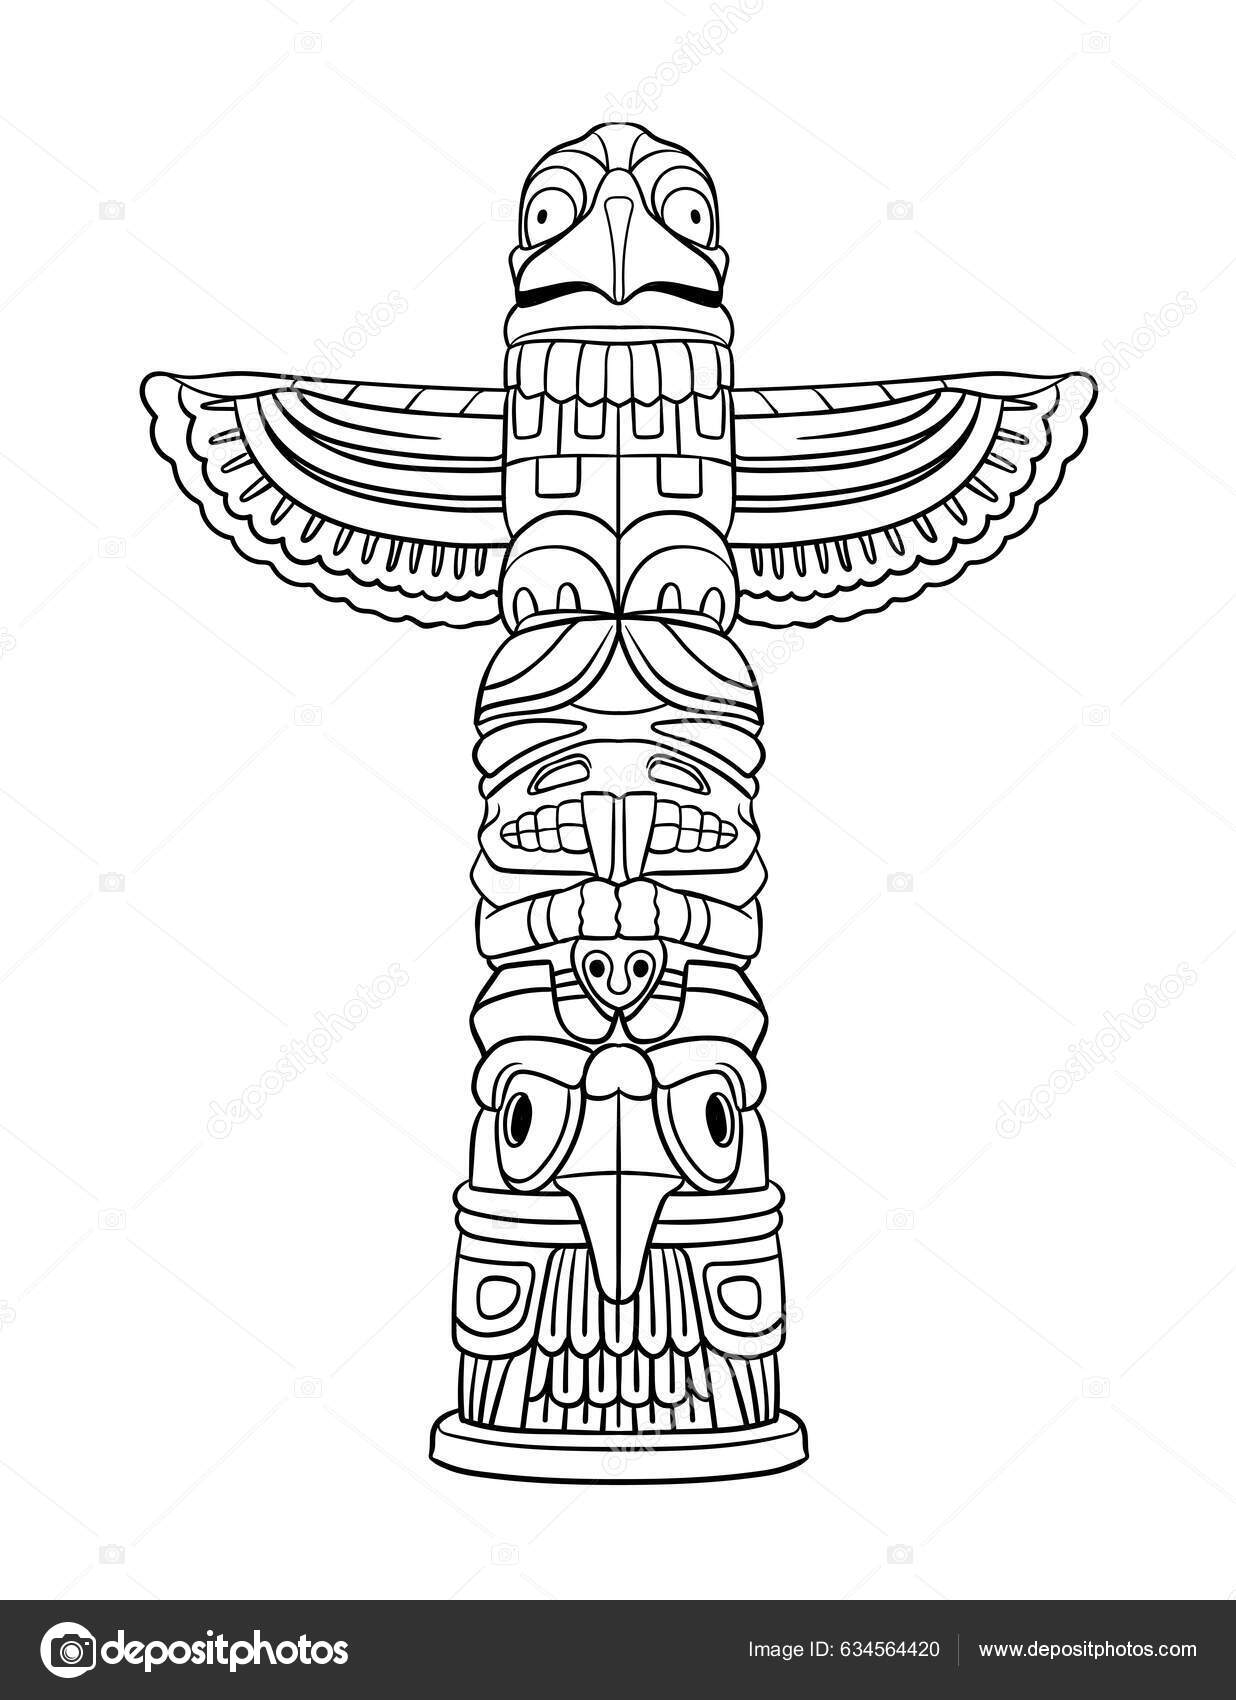 Cute funny coloring page native american indian totem provides hours stock vector by abbydesign